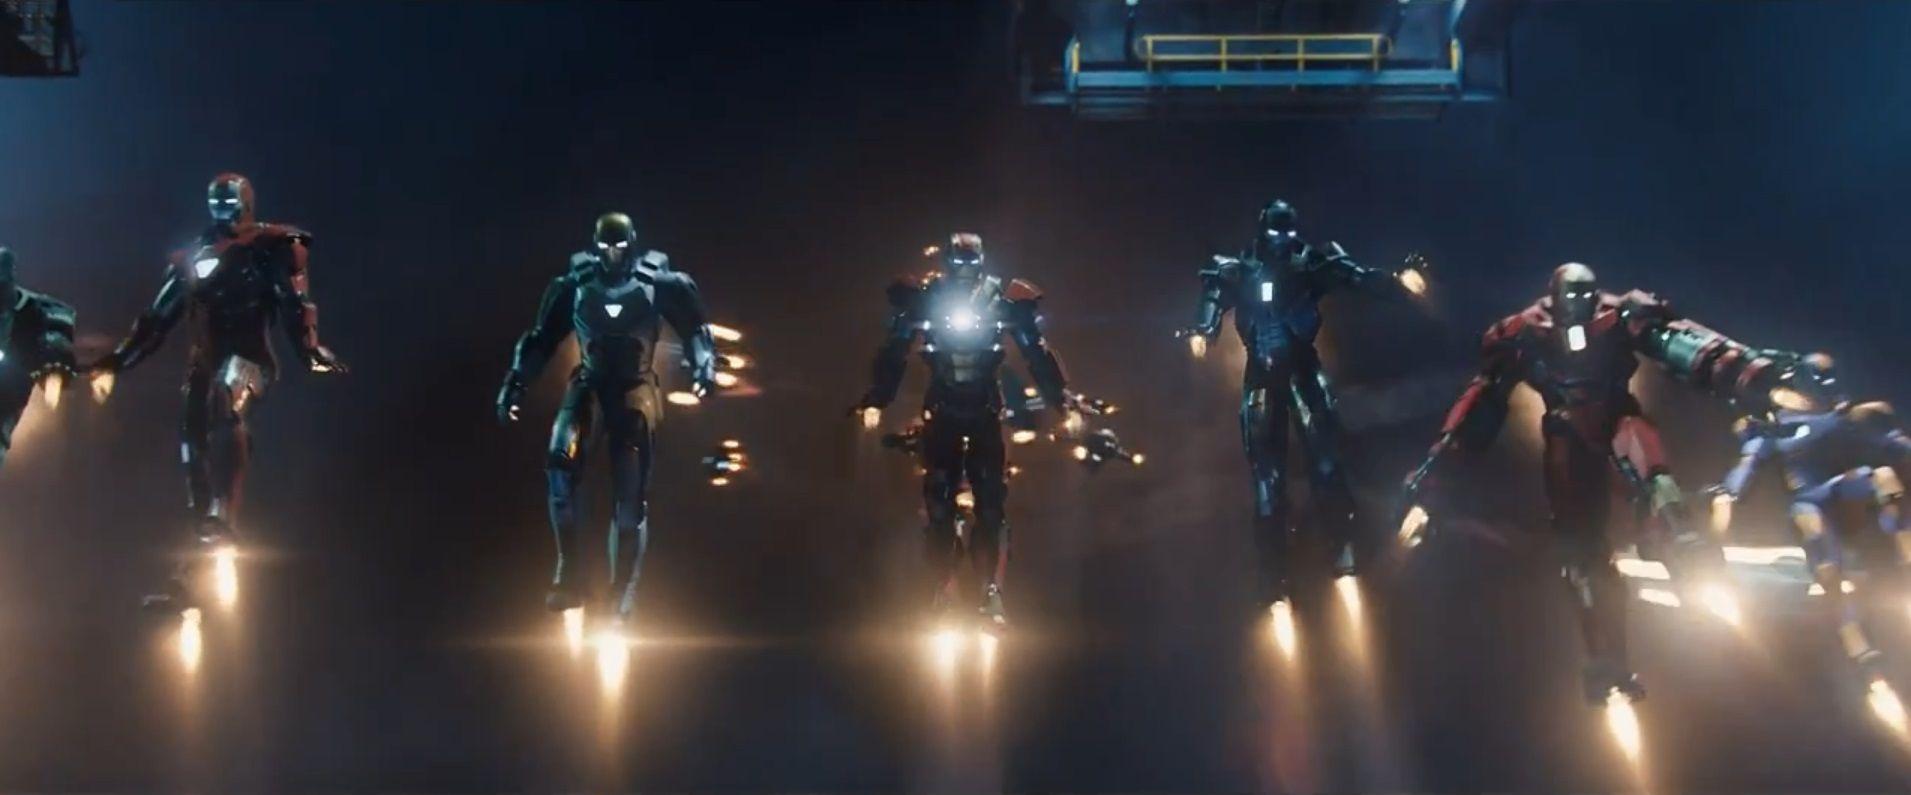 Iron Man 3 trailer wallpaper of new armor and Gwyneth Paltrow